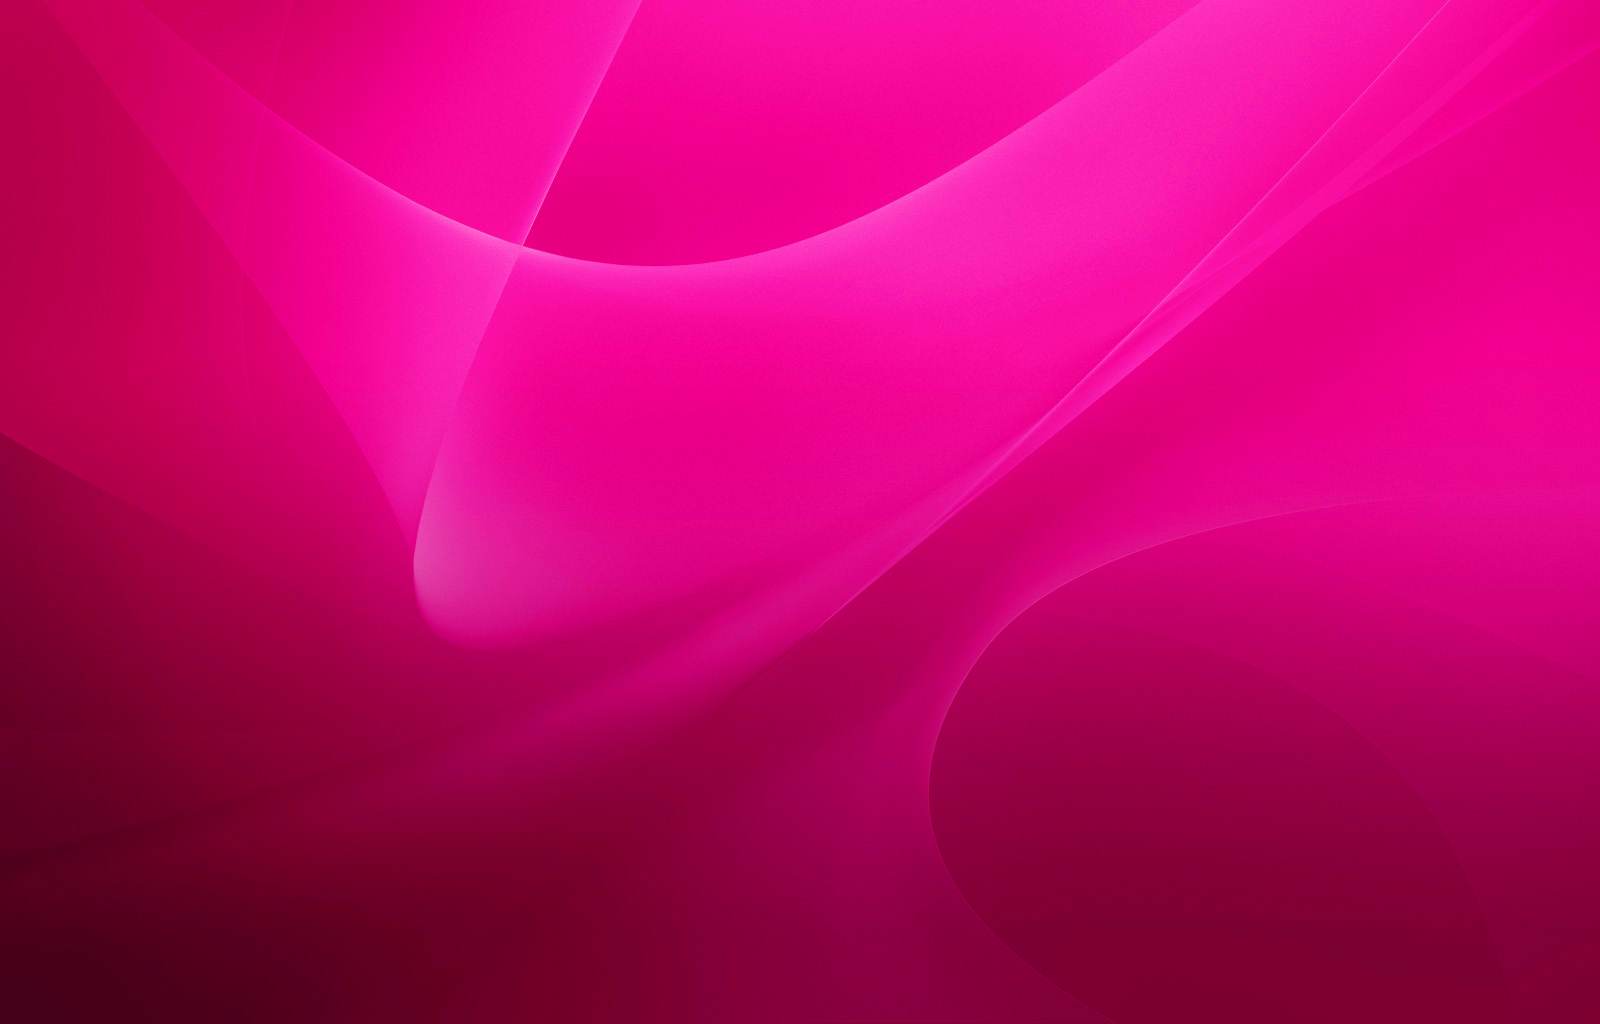 Pink Colour Background Hd - 1600x1024 Wallpaper 